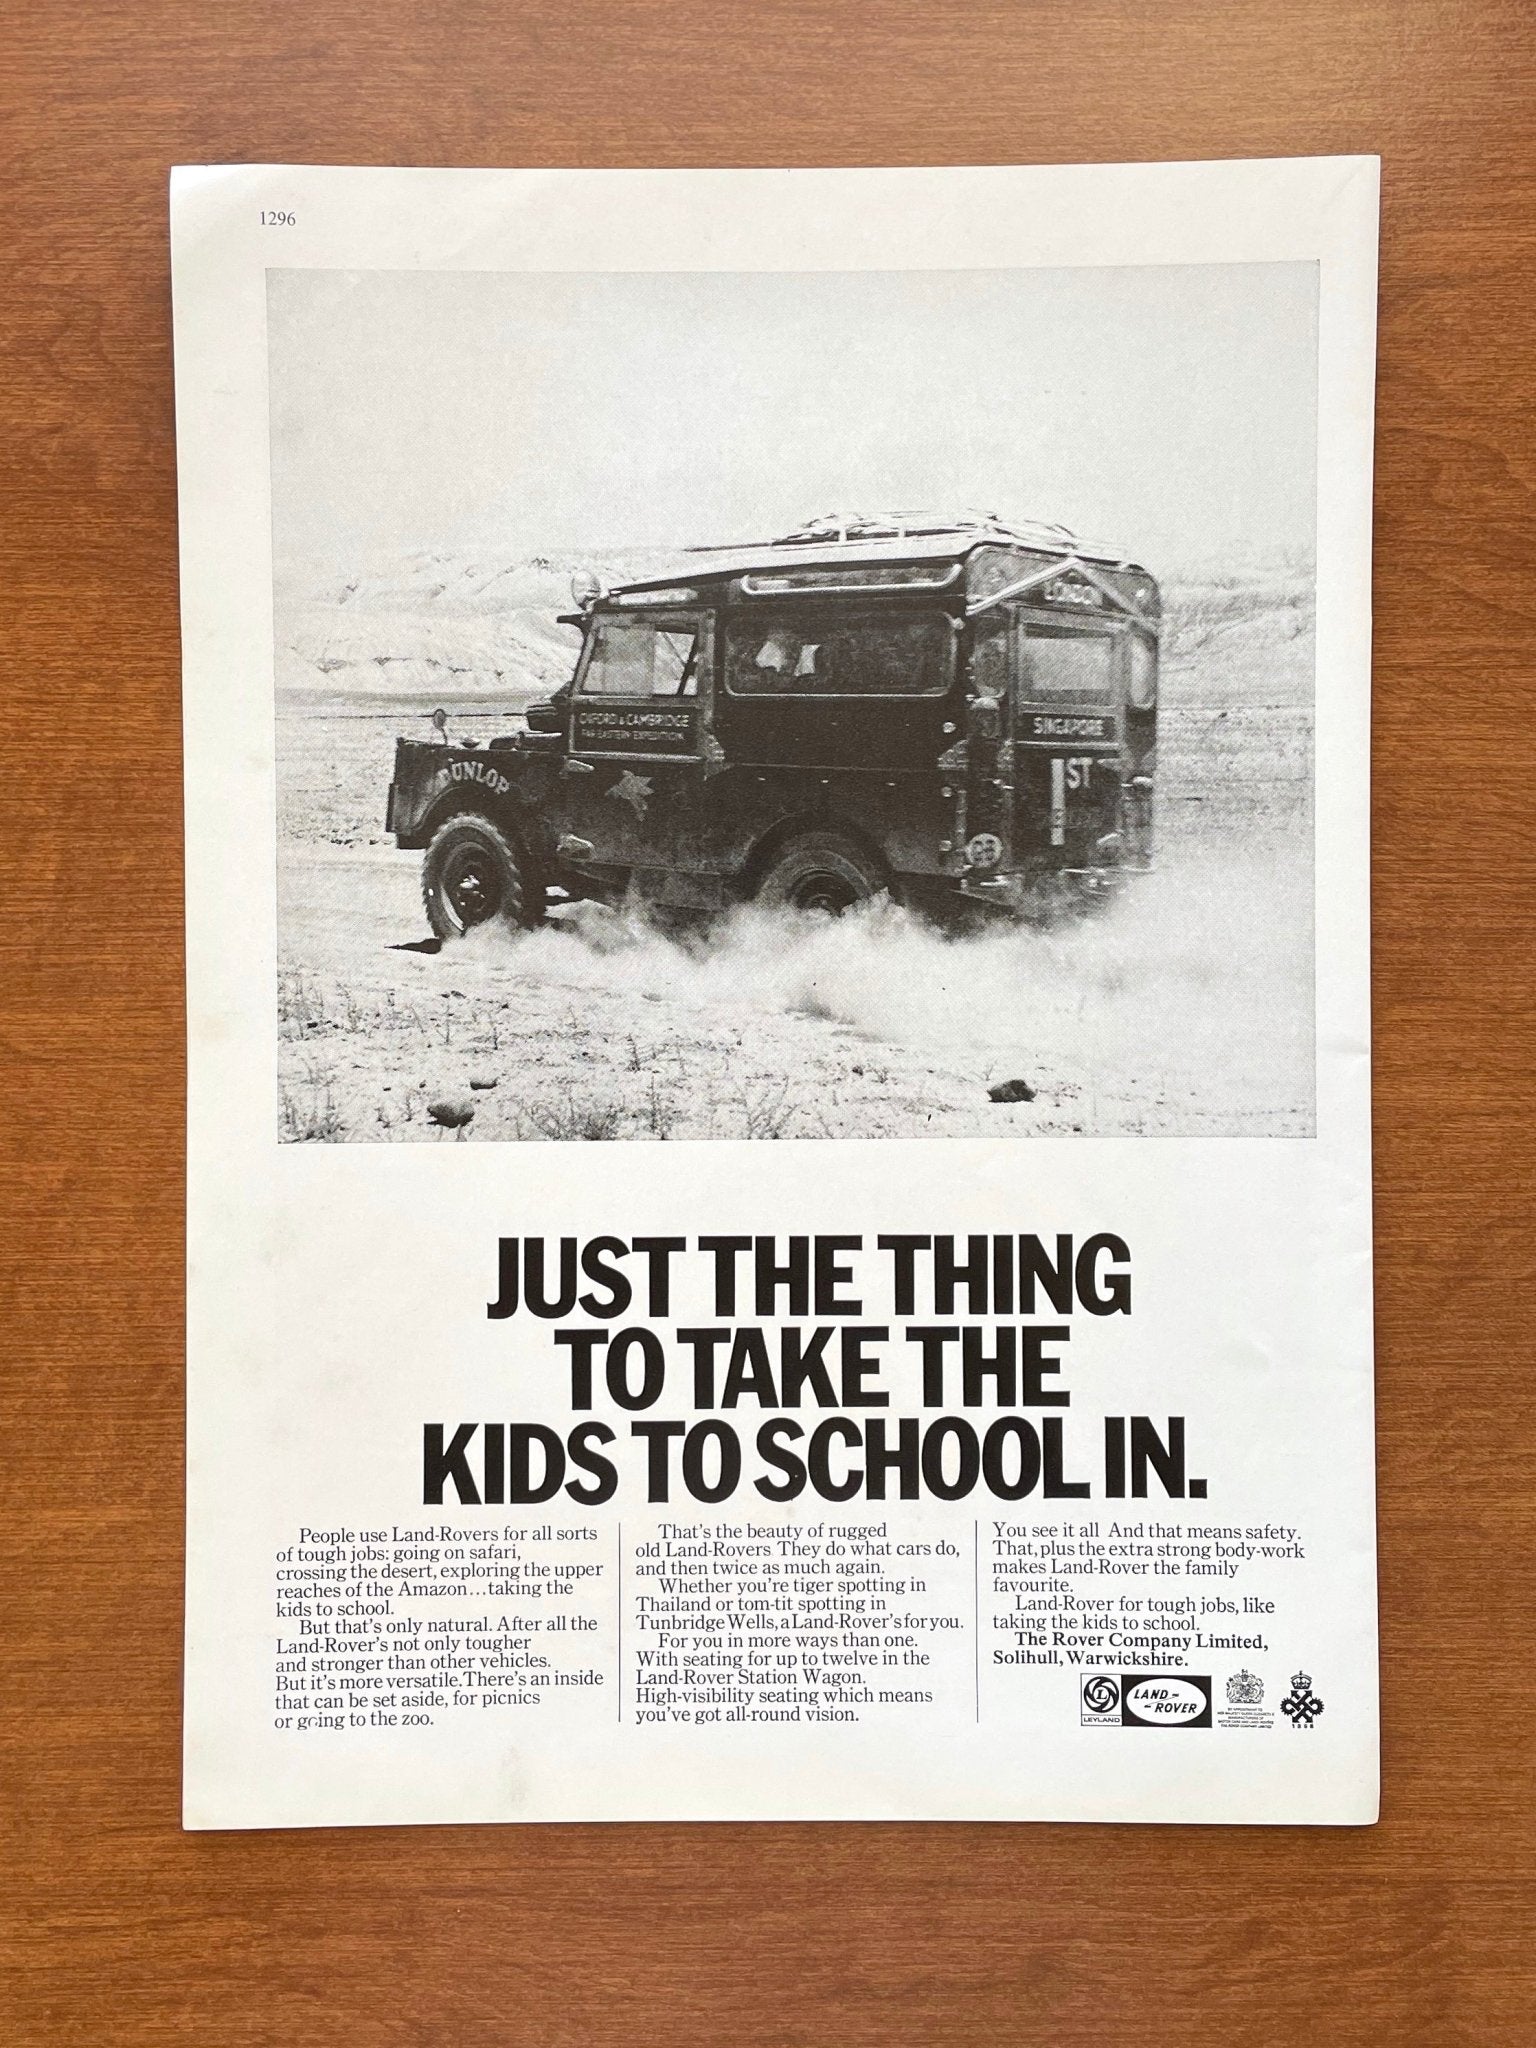 1968 Land Rover Series II "Take The Kids To School In." Advertisement